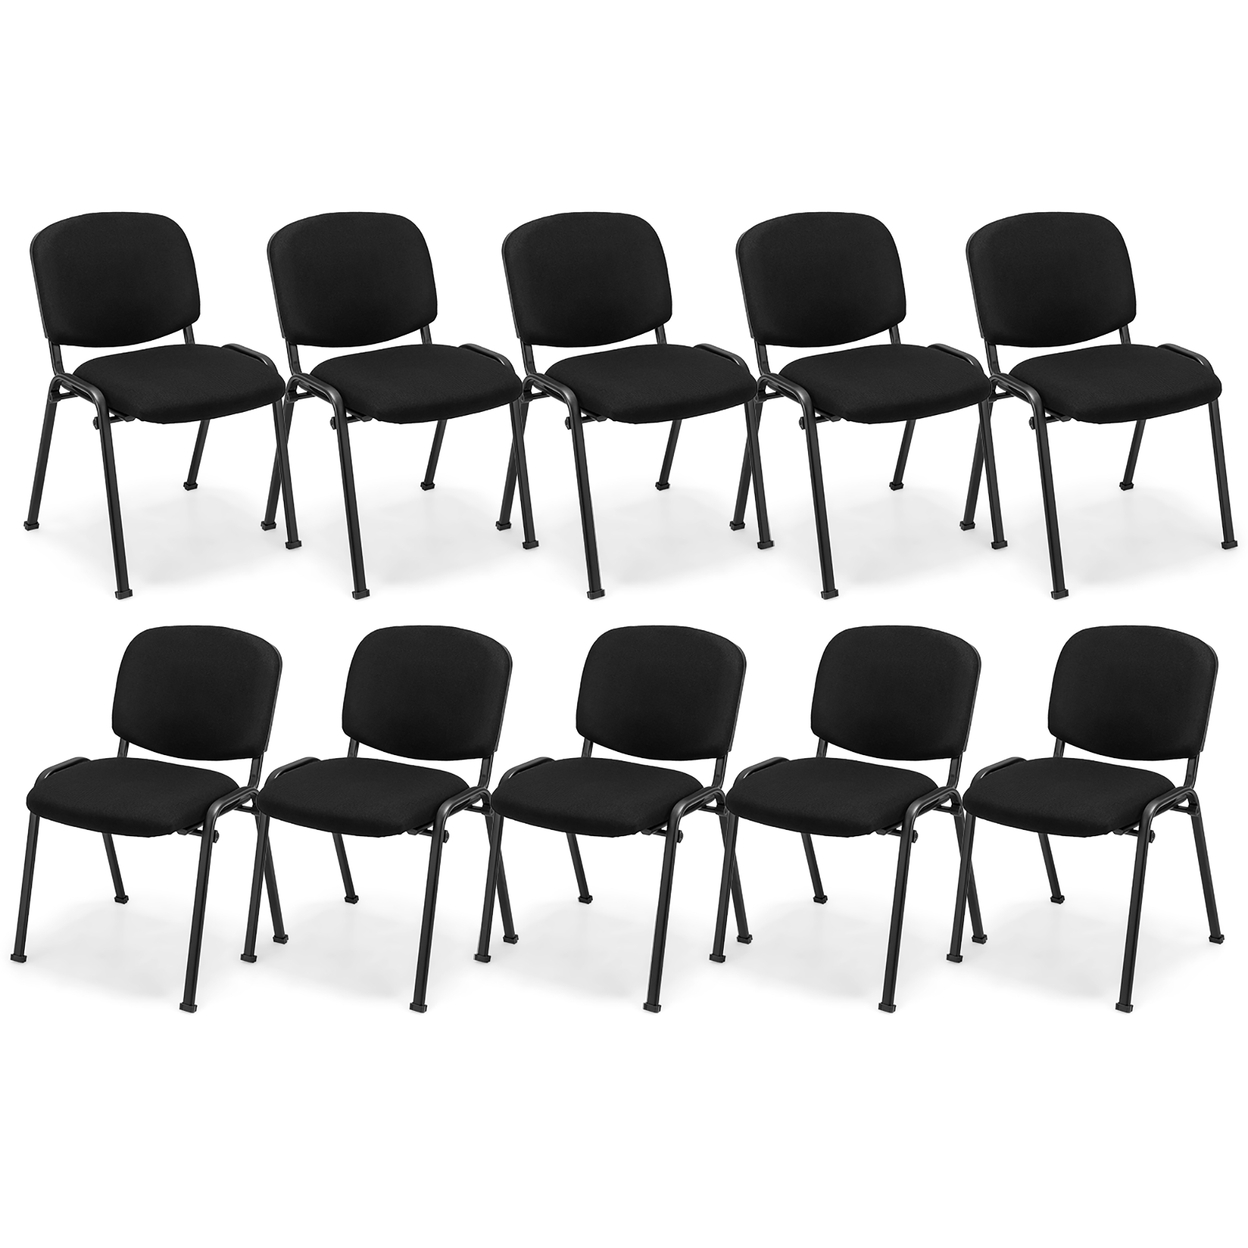 Set Of 10 Office Guest Chair Stackable Reception Chair Waiting Conference Room